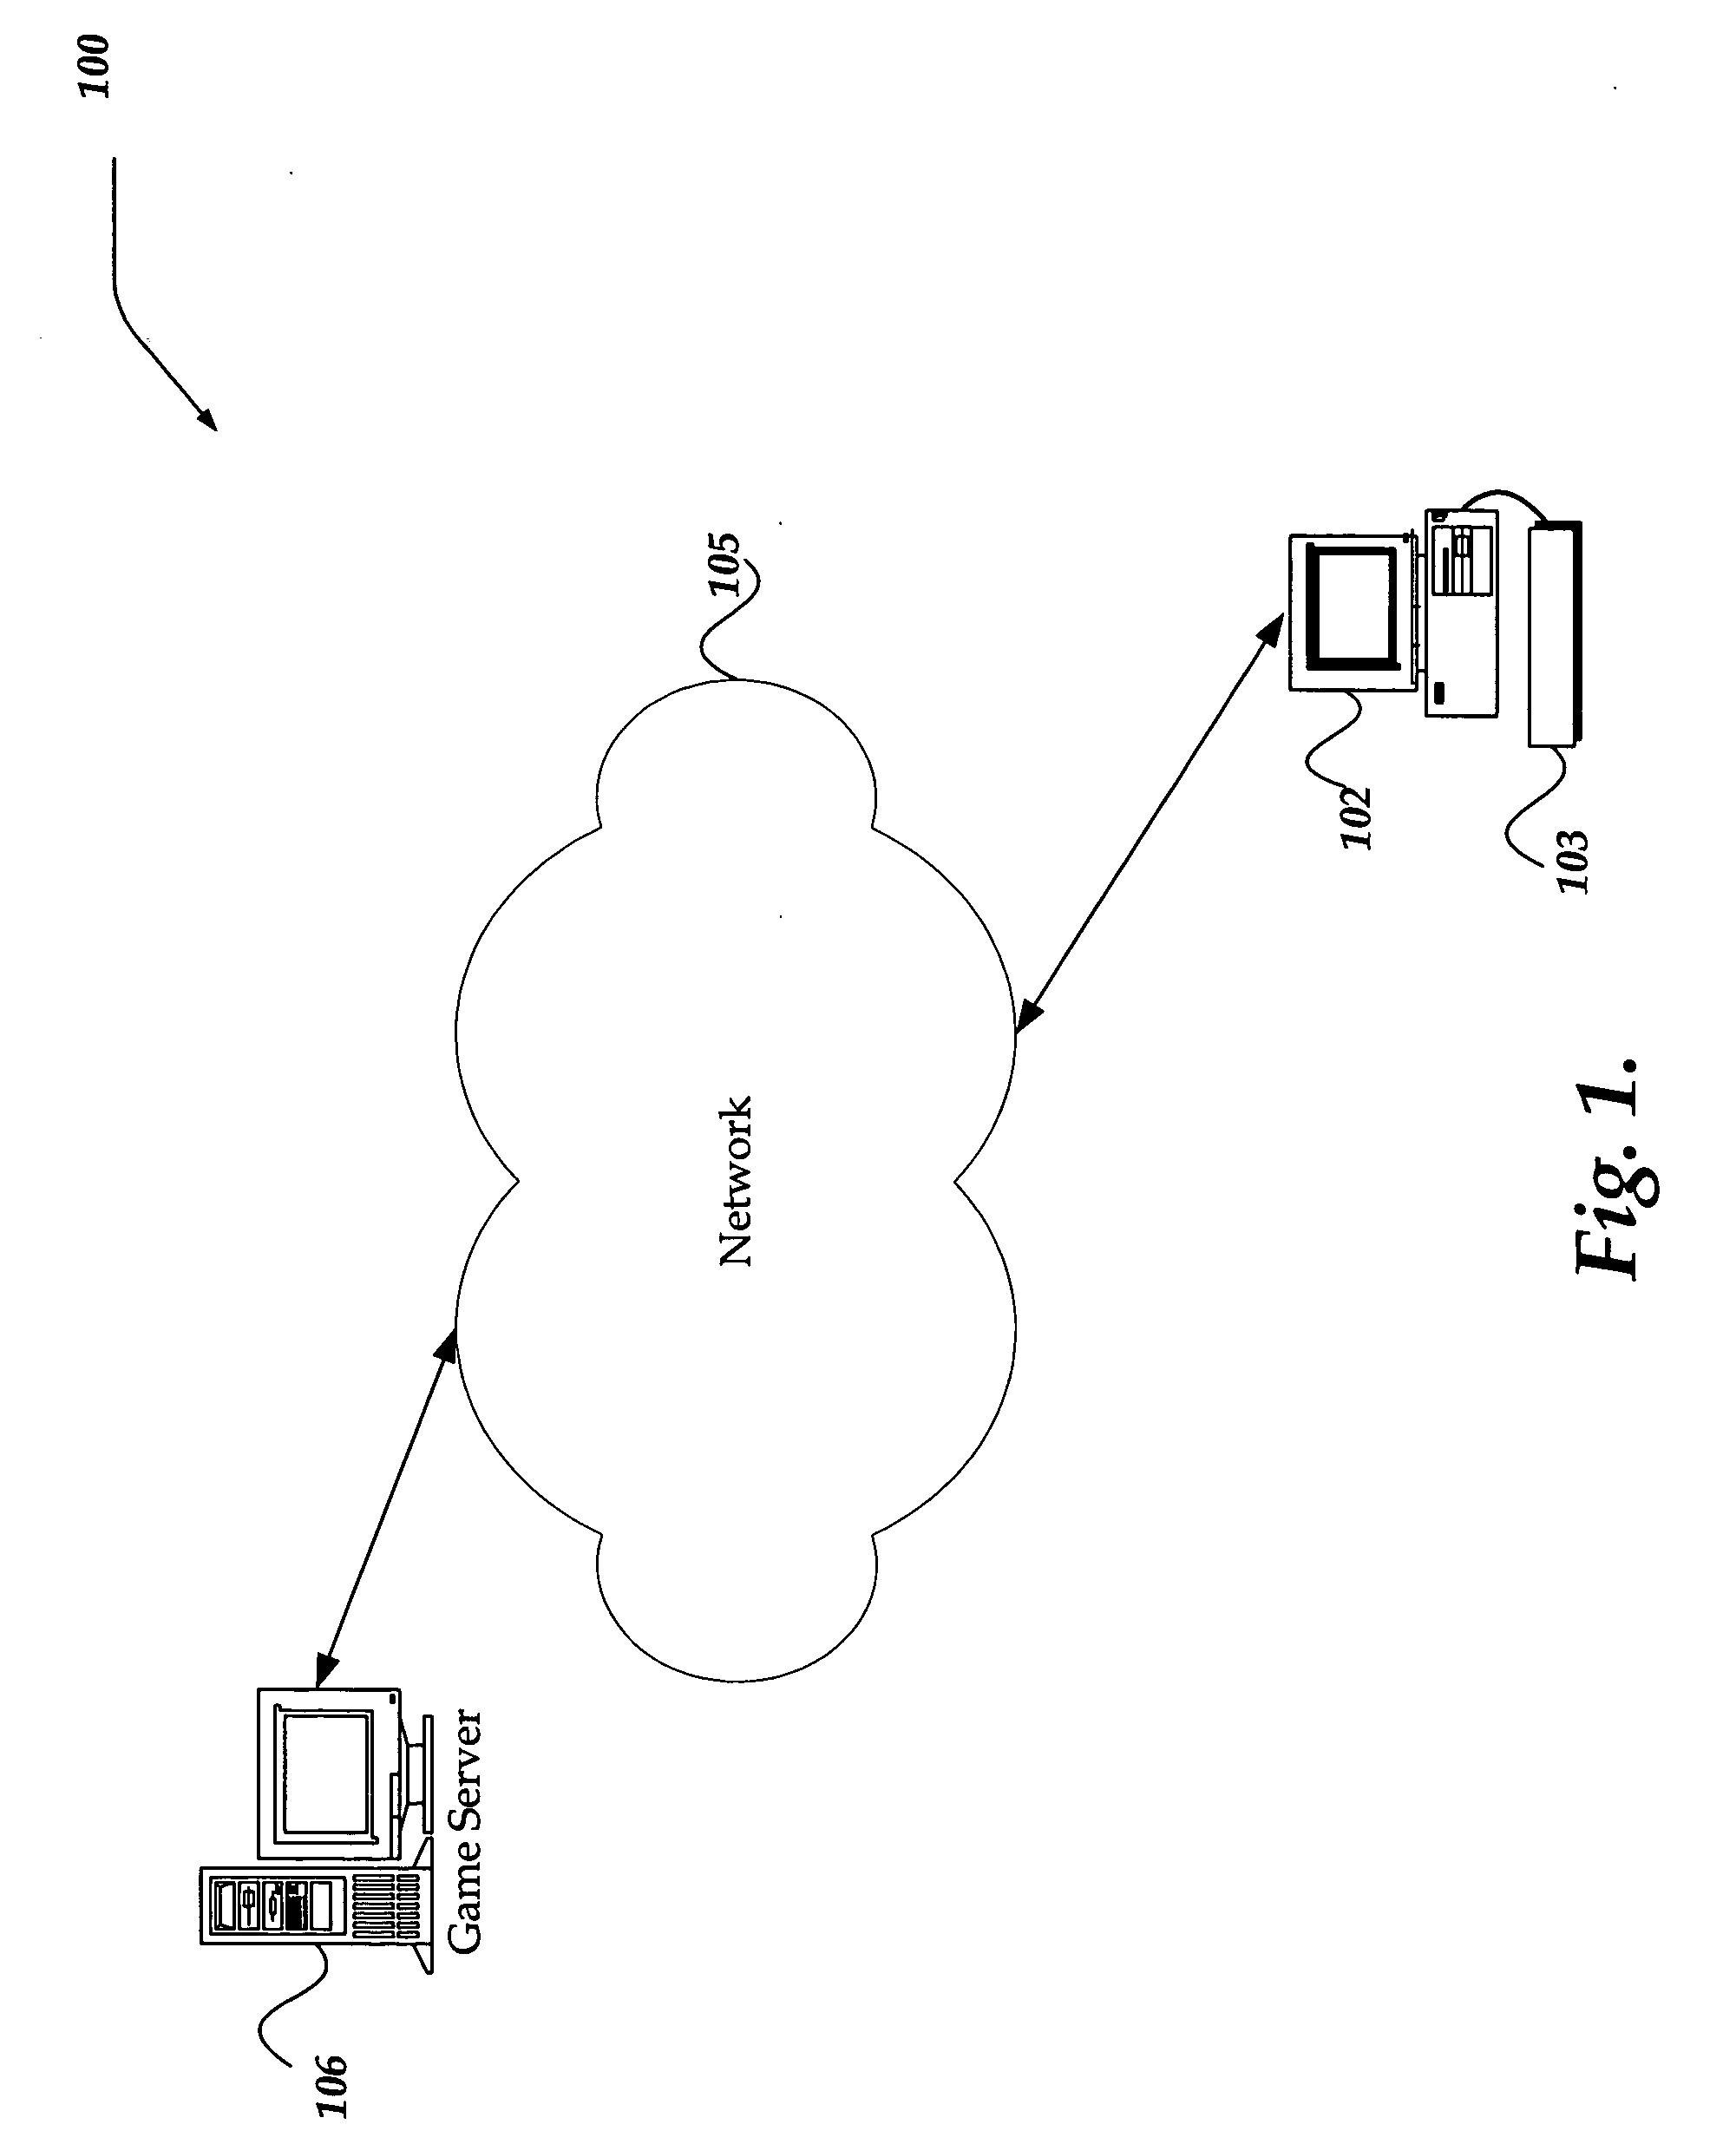 Method and apparatus for backlighting of a keyboard for use with a game device